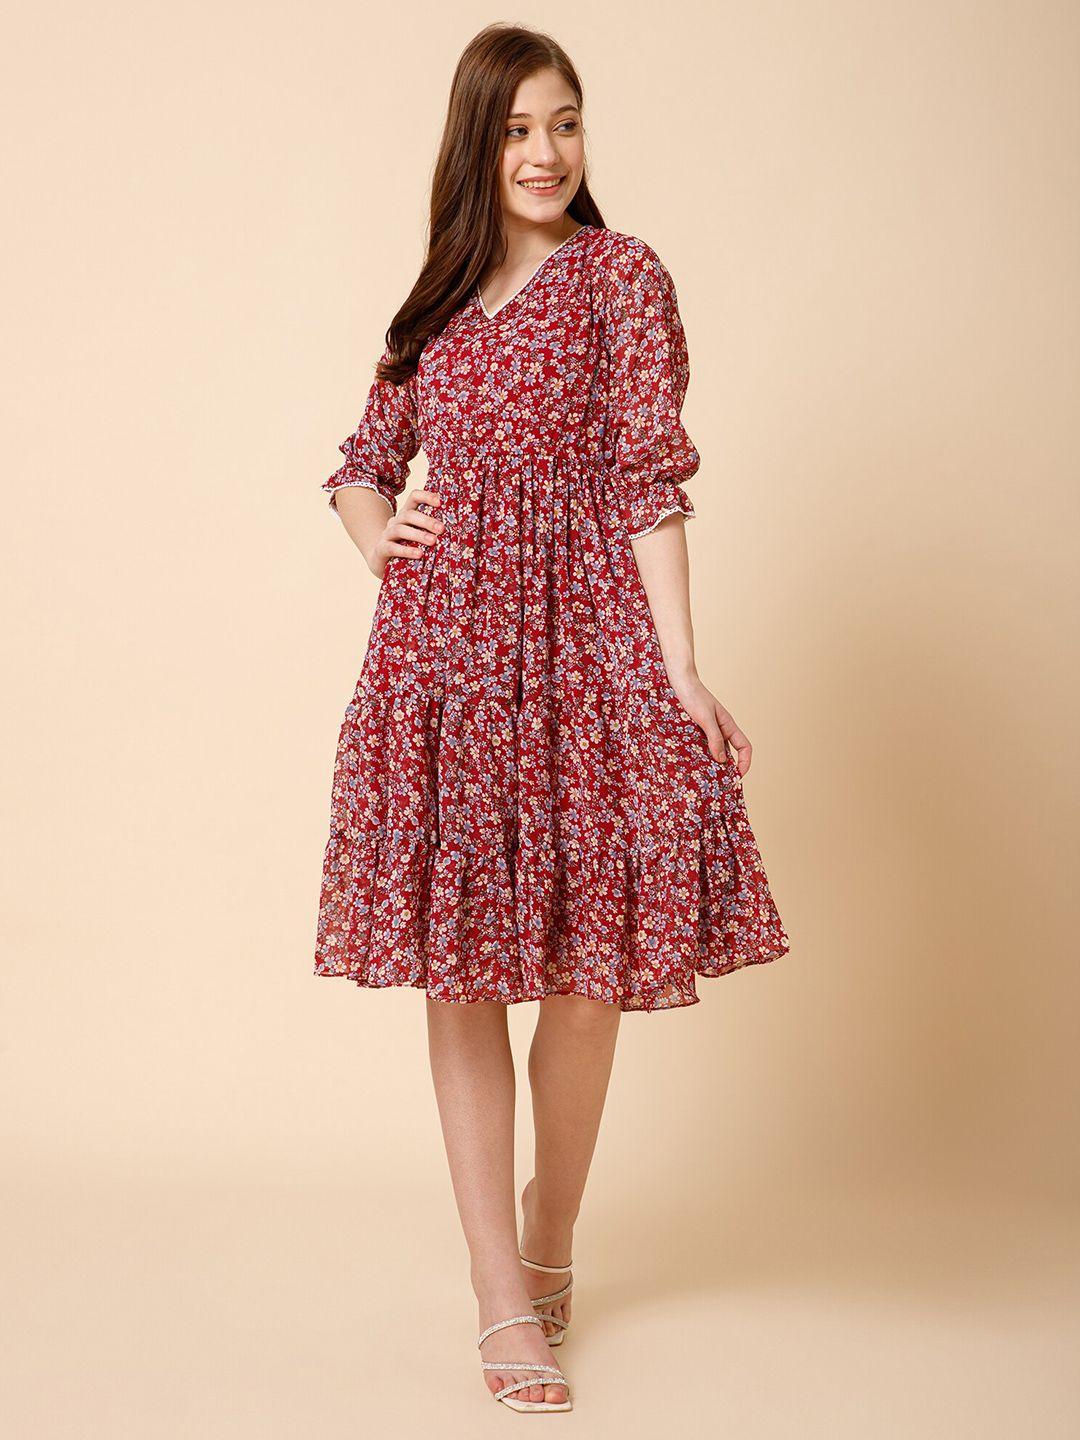 fbella maroon floral printed bell sleeve tiered fit & flare dress